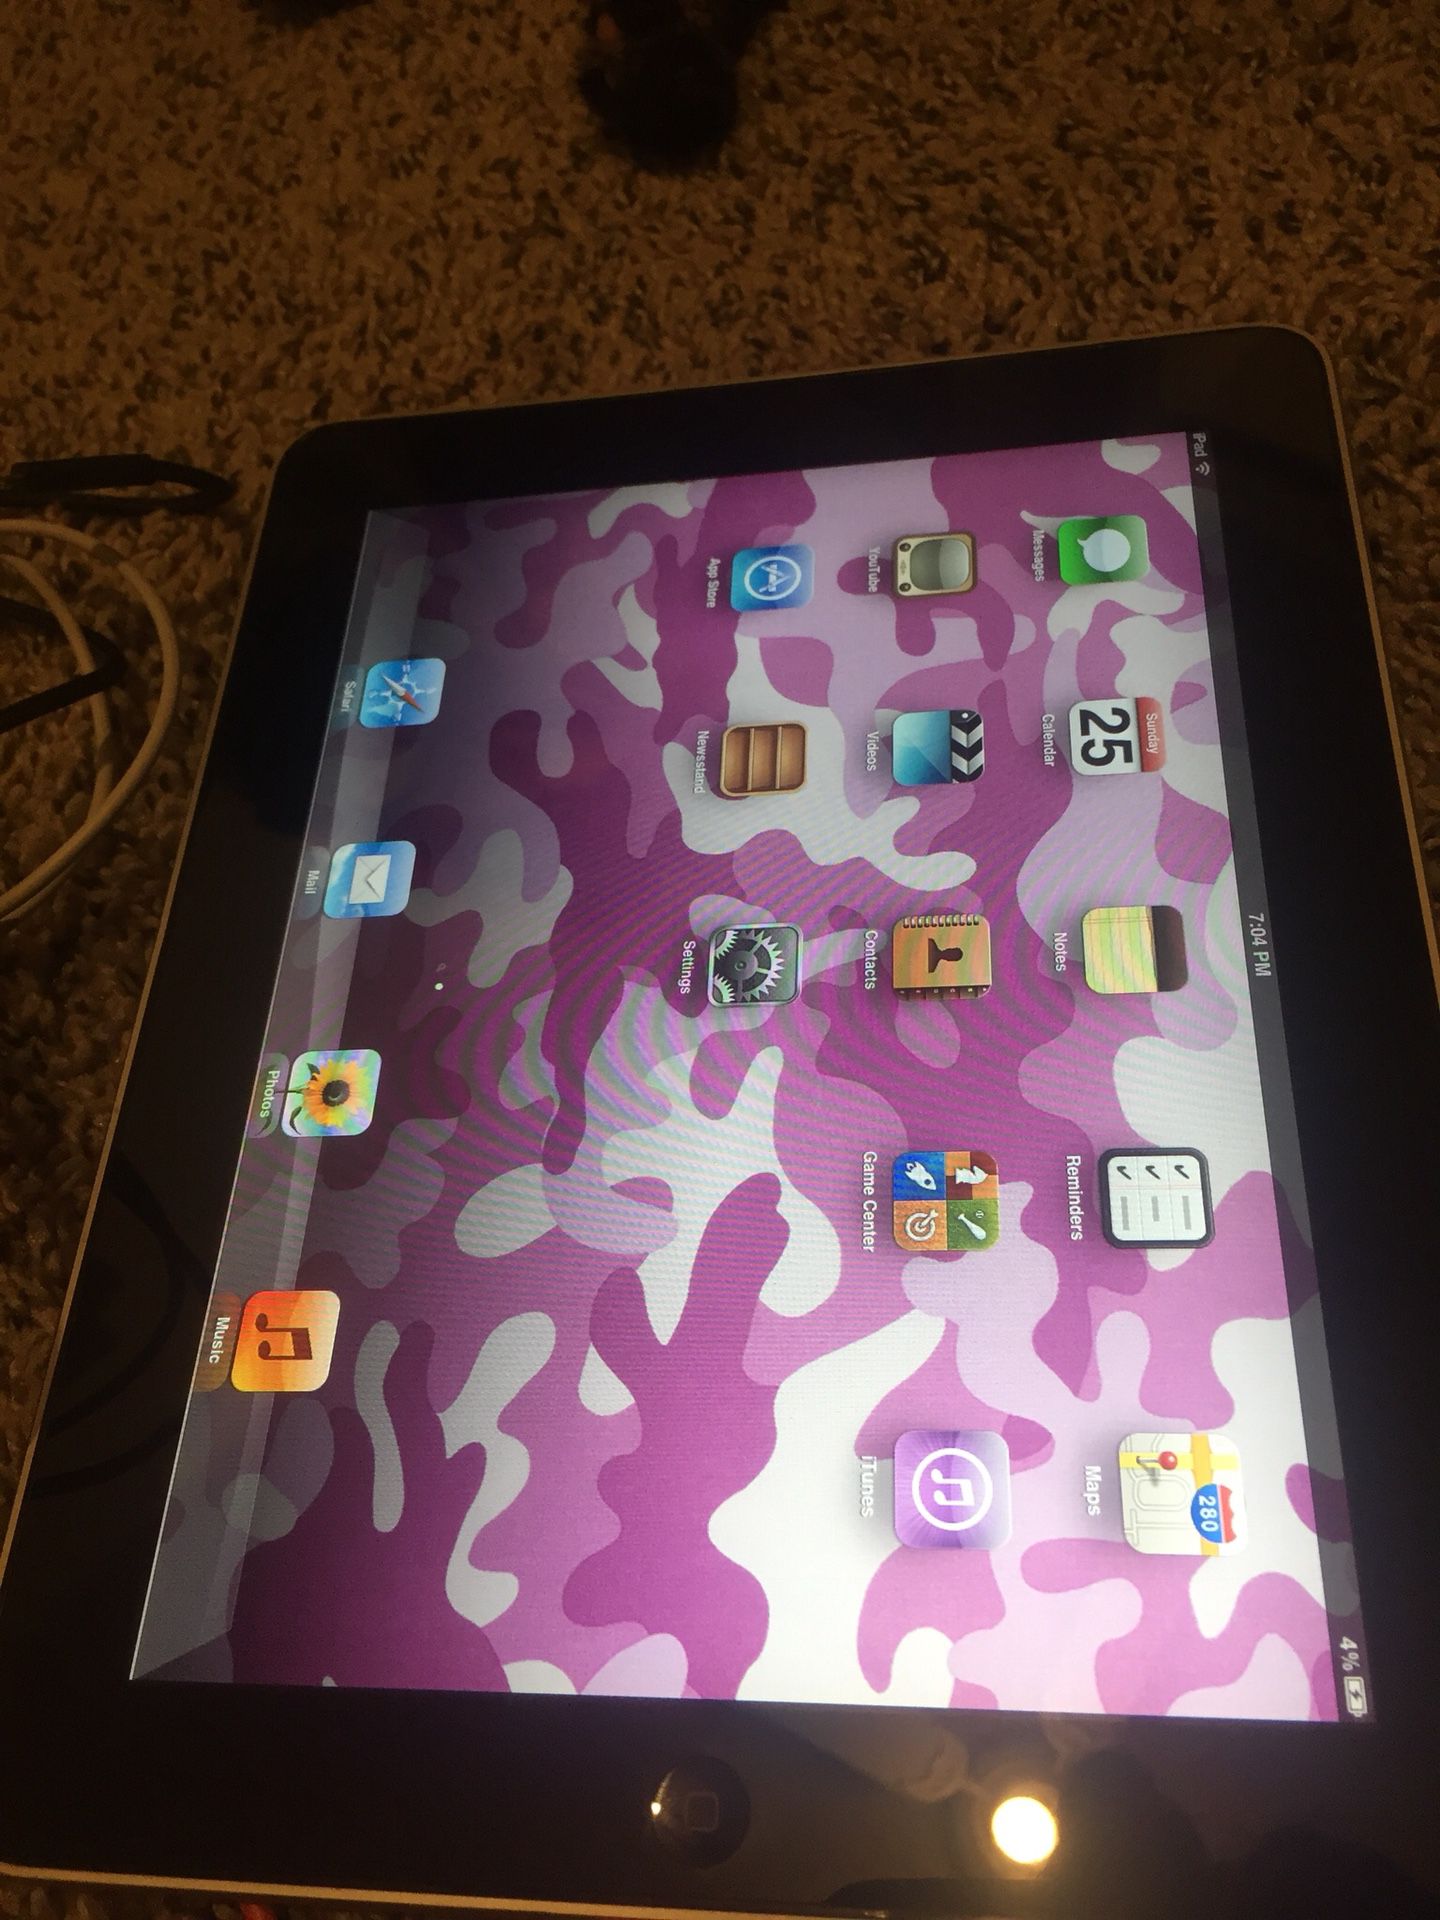 💗IPAD 2 💗mint condition works great comes with charger